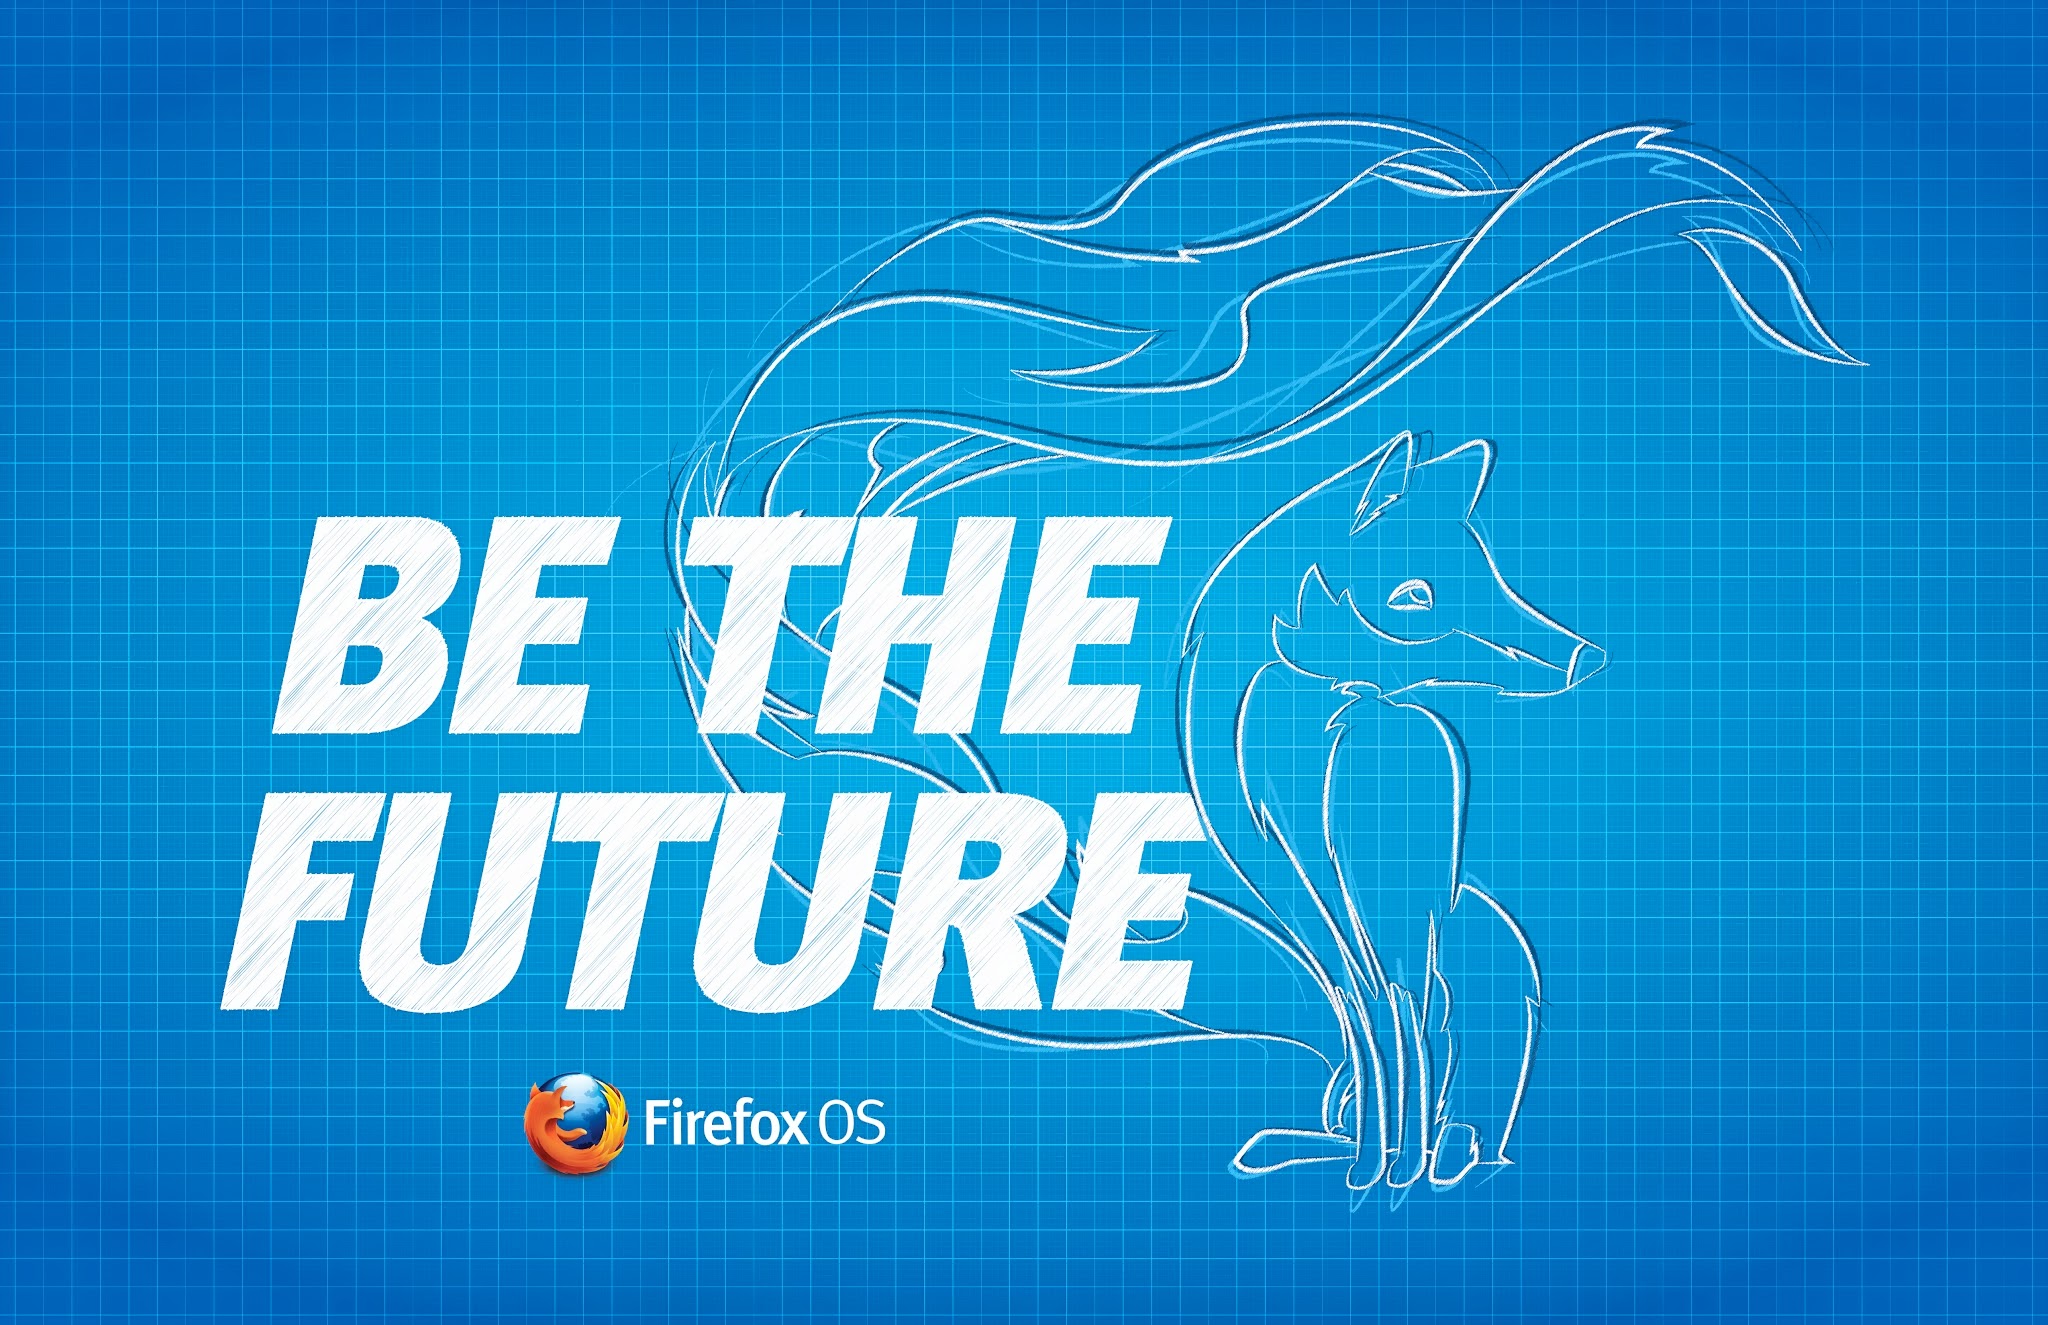 Firefox OS - be the future